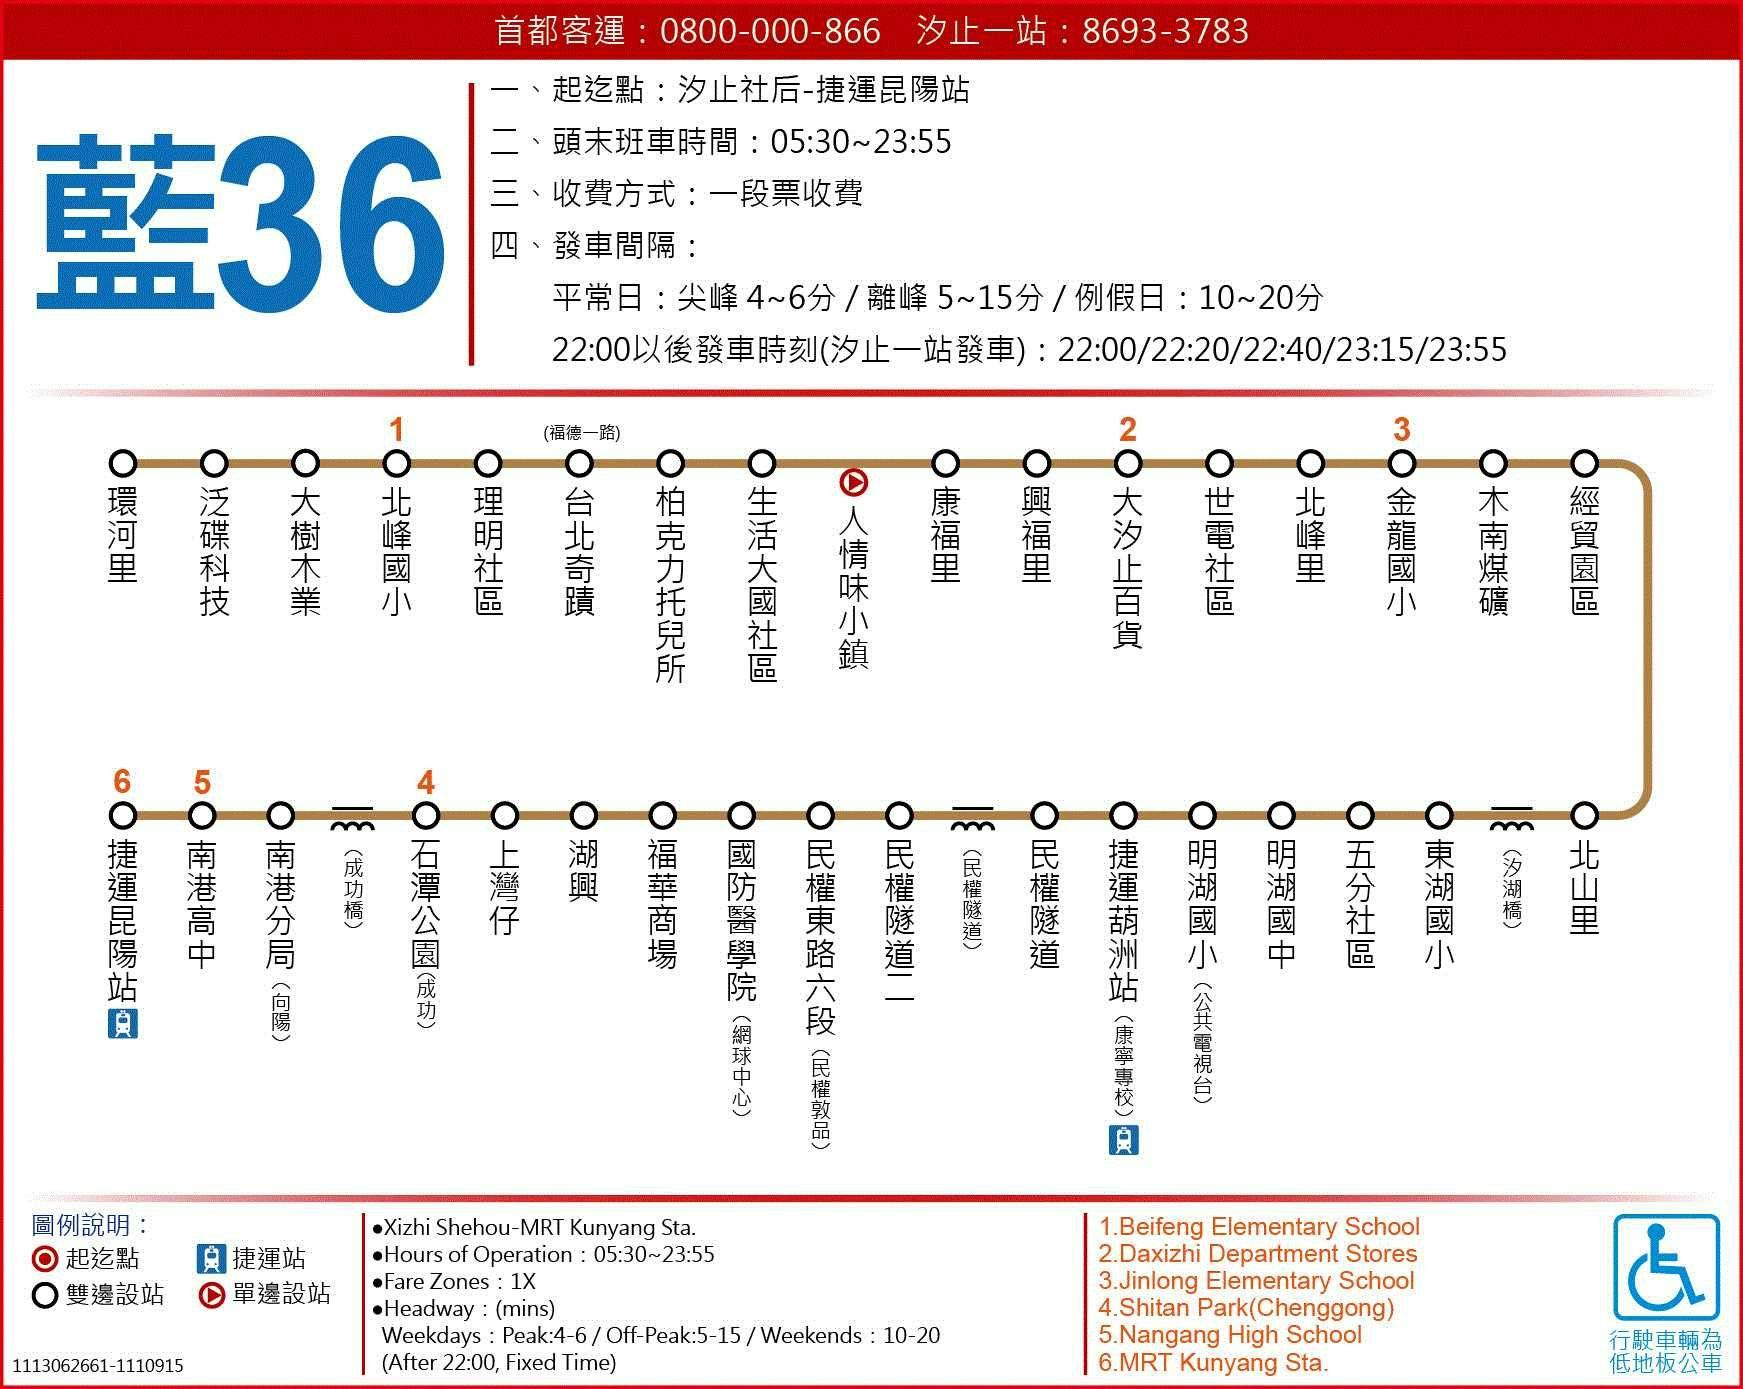 BL36Route Map-台北市 Bus